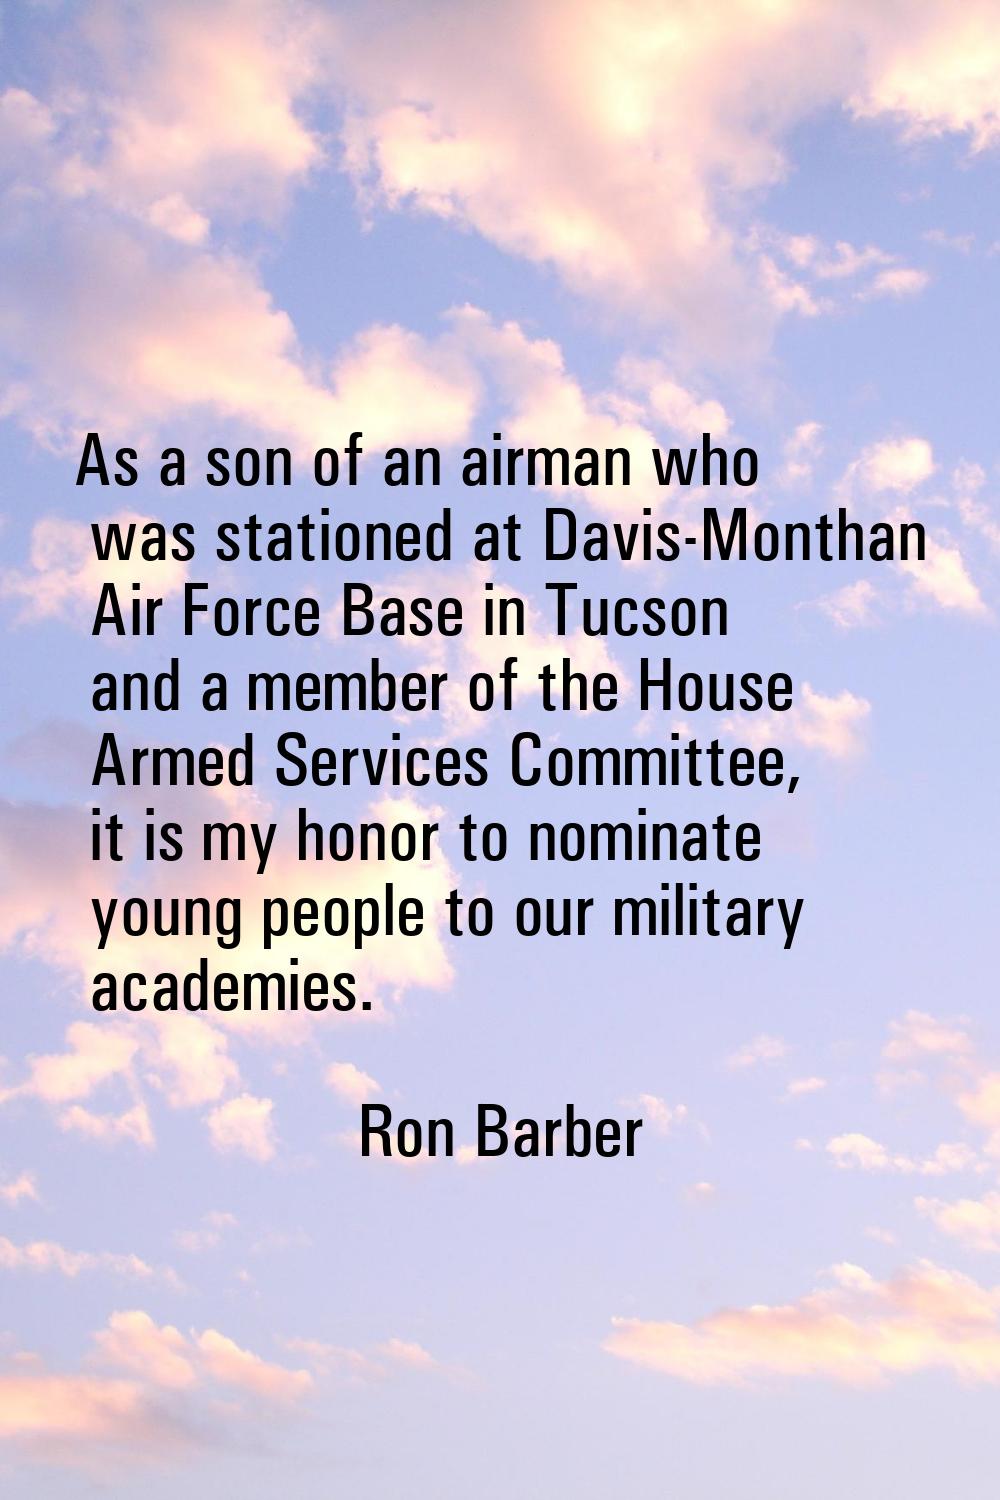 As a son of an airman who was stationed at Davis-Monthan Air Force Base in Tucson and a member of t